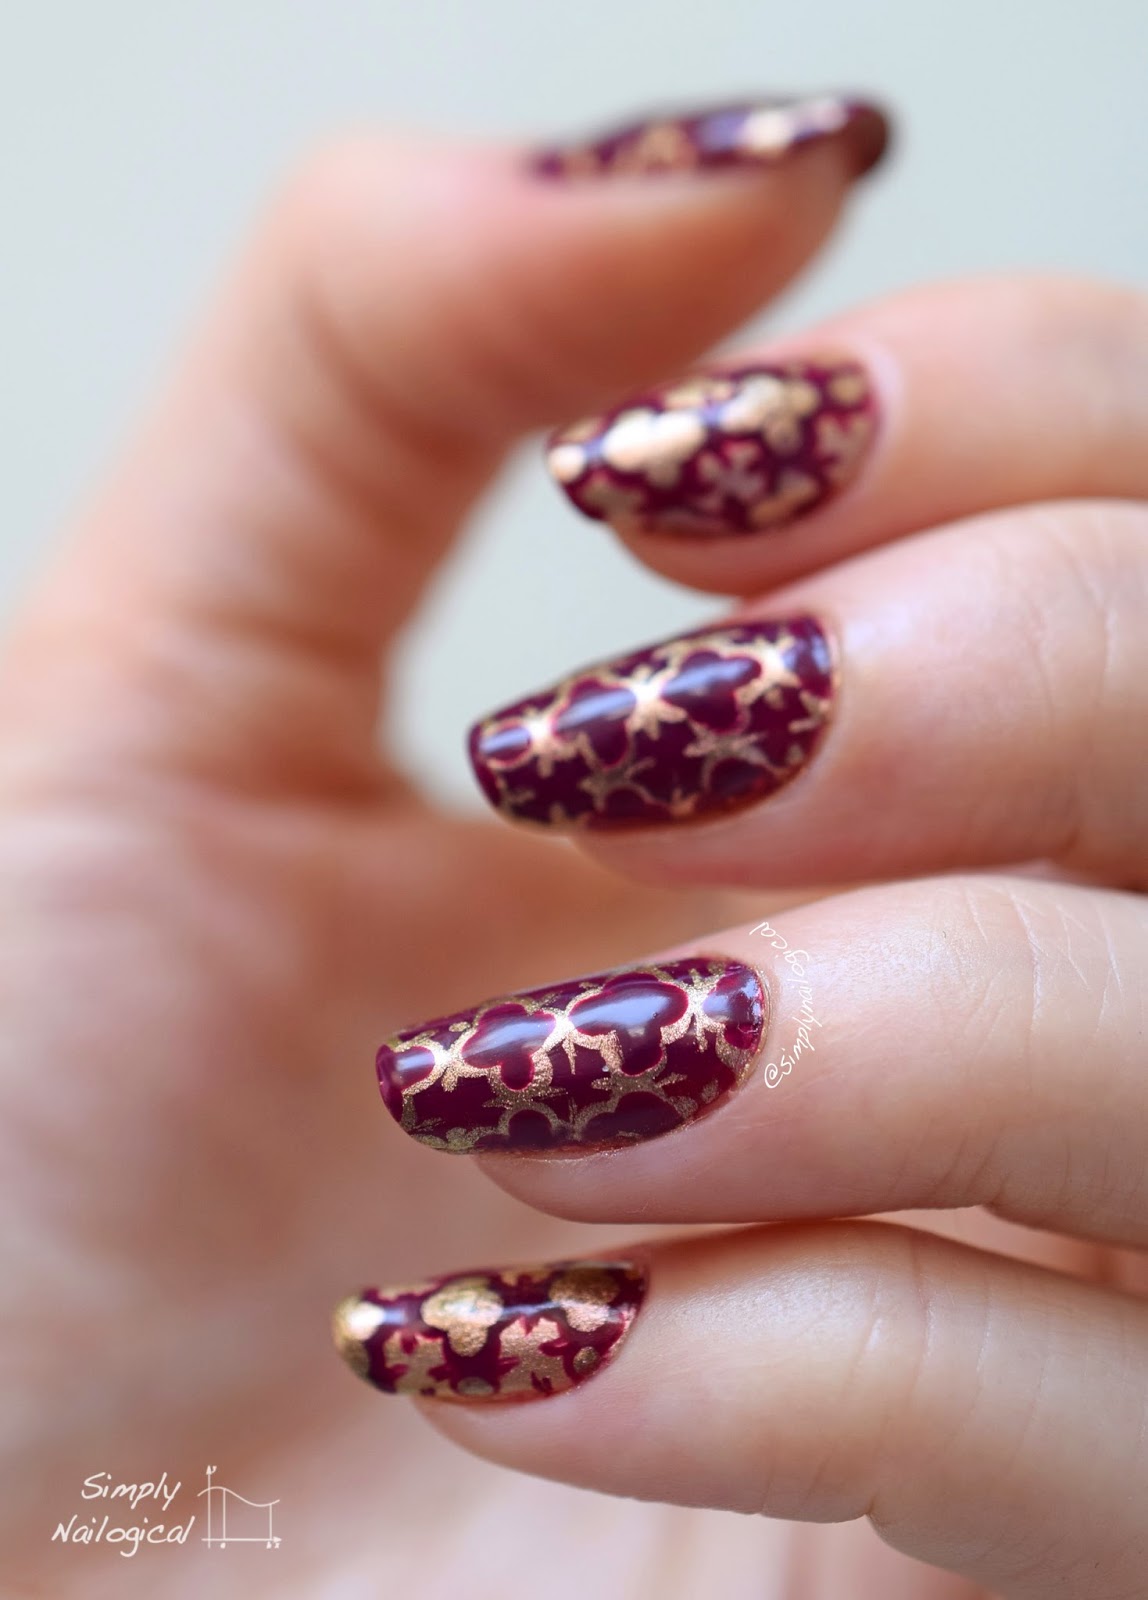 Manic Talons Nail Design: A First Attempt at Nail Foils - Foiled Dots